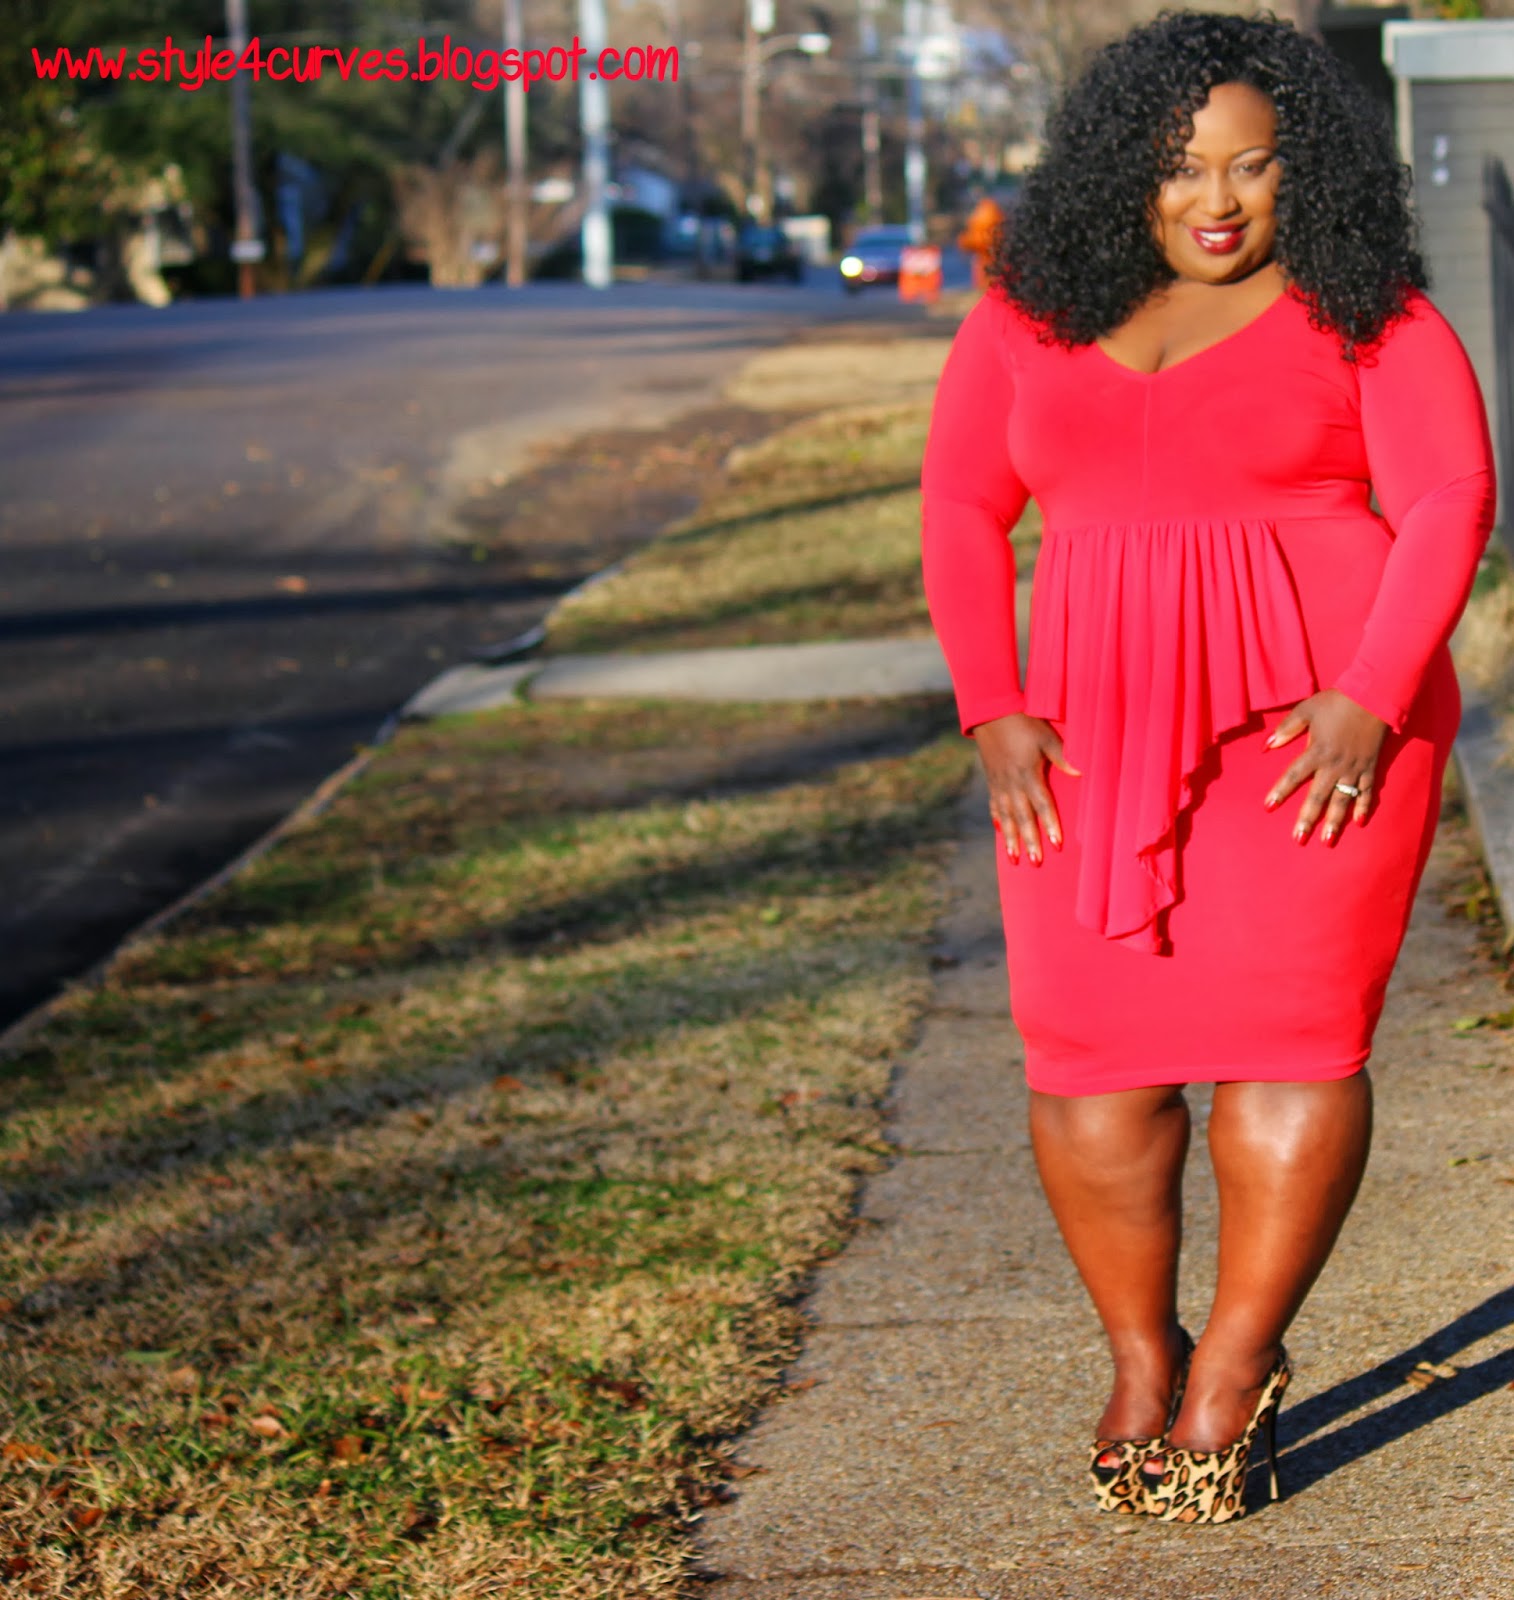 Style 4 Curves --For the Curvy Confident Woman: Curvy Devil In A Red Dress